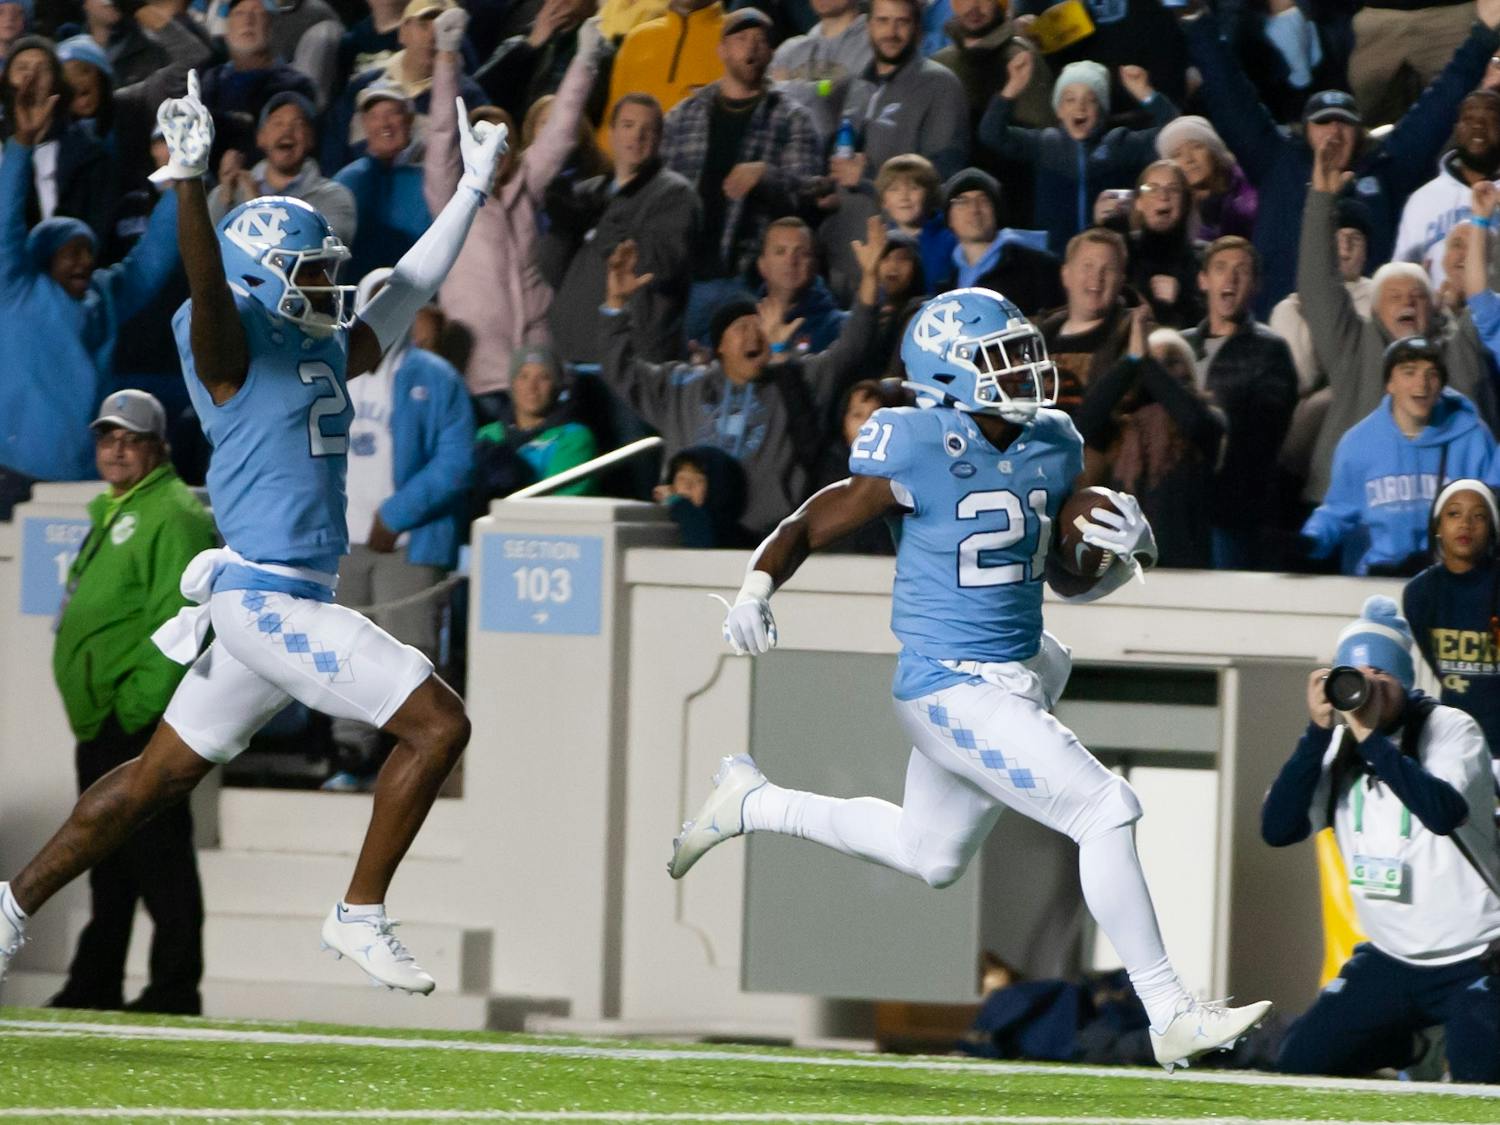 UNC sophomore running back, Elijah Green (21), scores a touchdown in Kenan Stadium on Nov. 19, 2022, as the Tar Heels face off against the Georgia Tech Yellow Jackets.